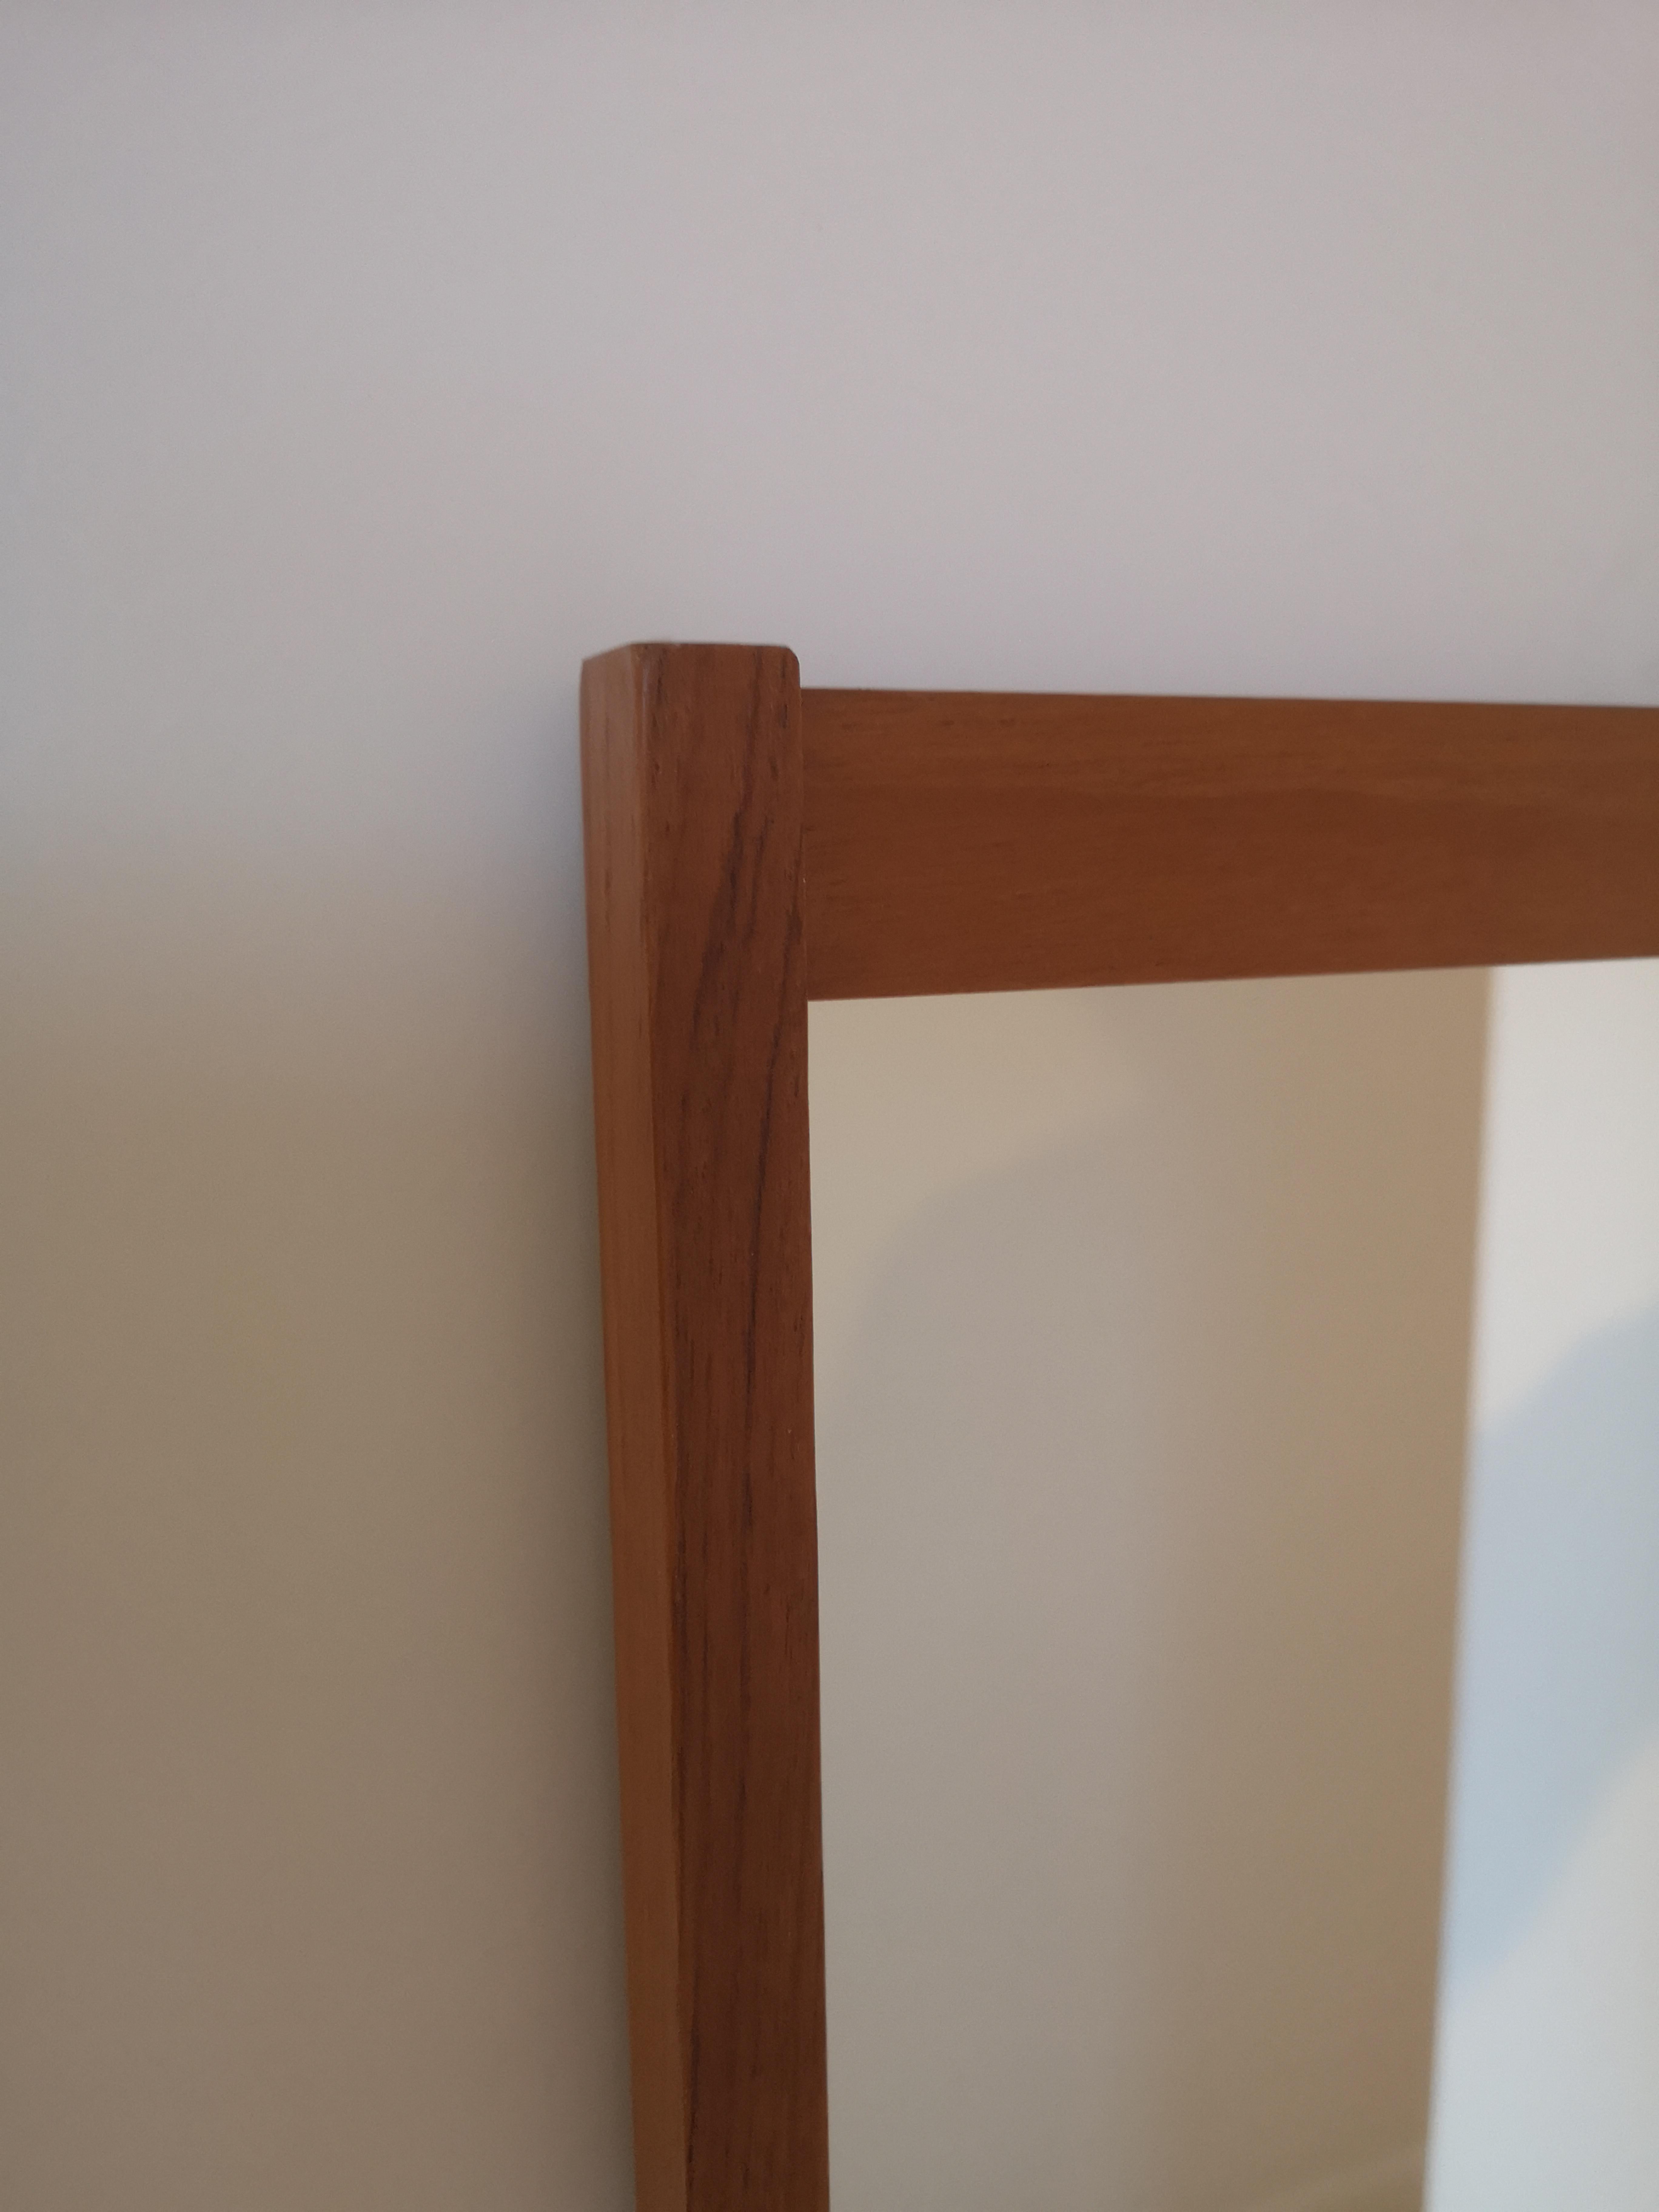 A beatifully crafted Swedish teak mirror from 1960s. This mirror is model 